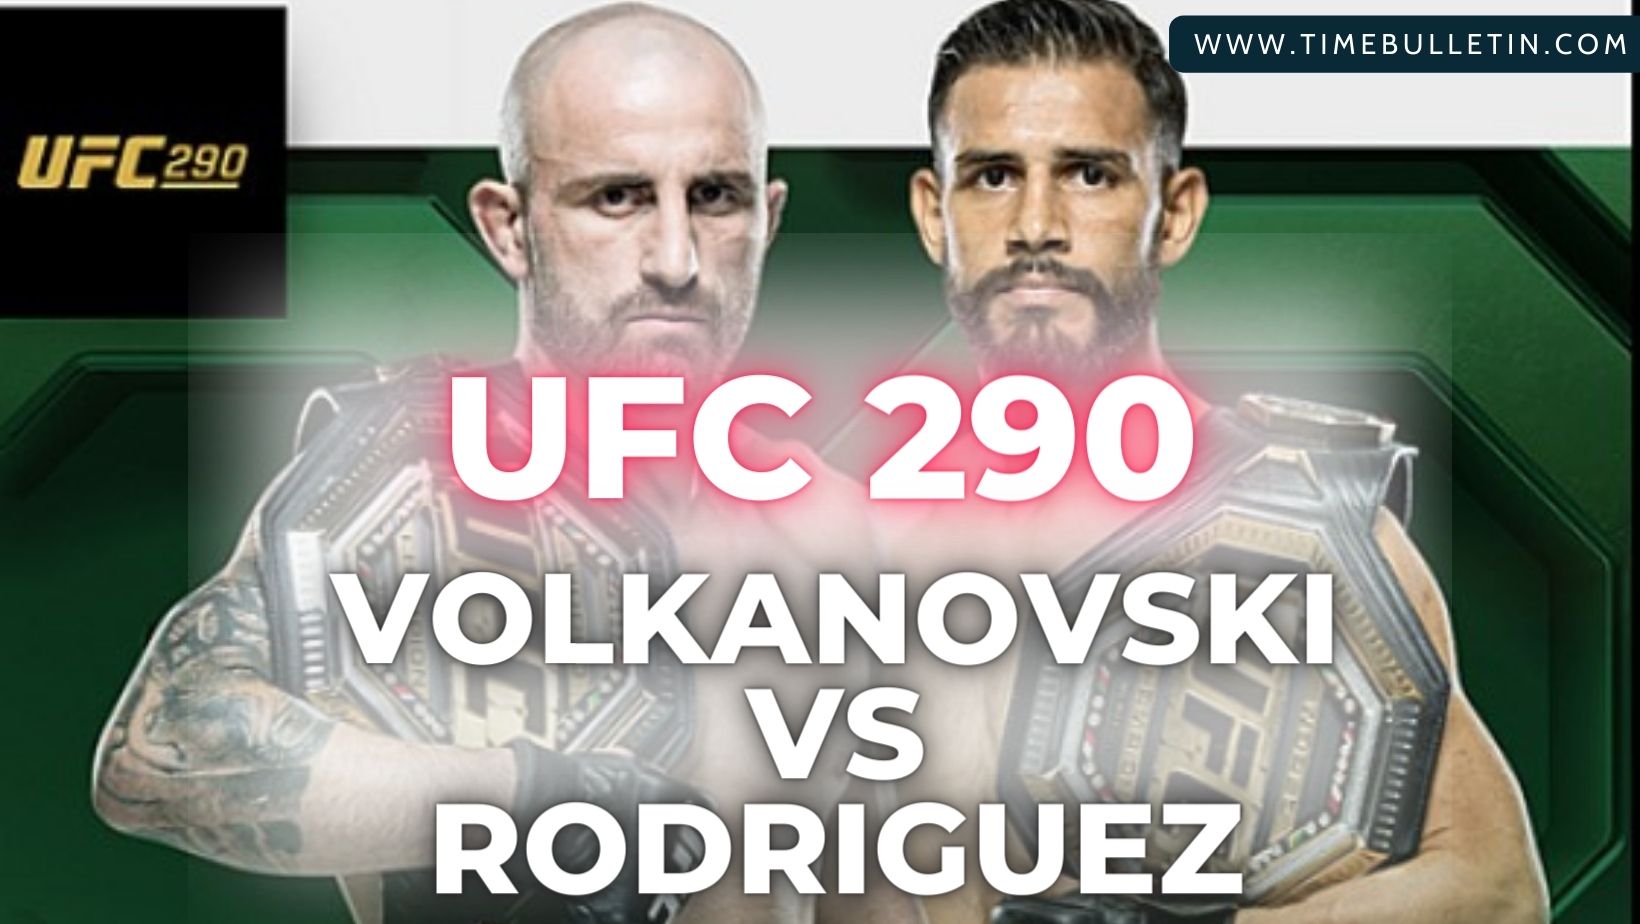 UFC 290 Volkanovski vs Rodriguez – Fight Card, Schedule, Date, Time, and Everything You Need to Know